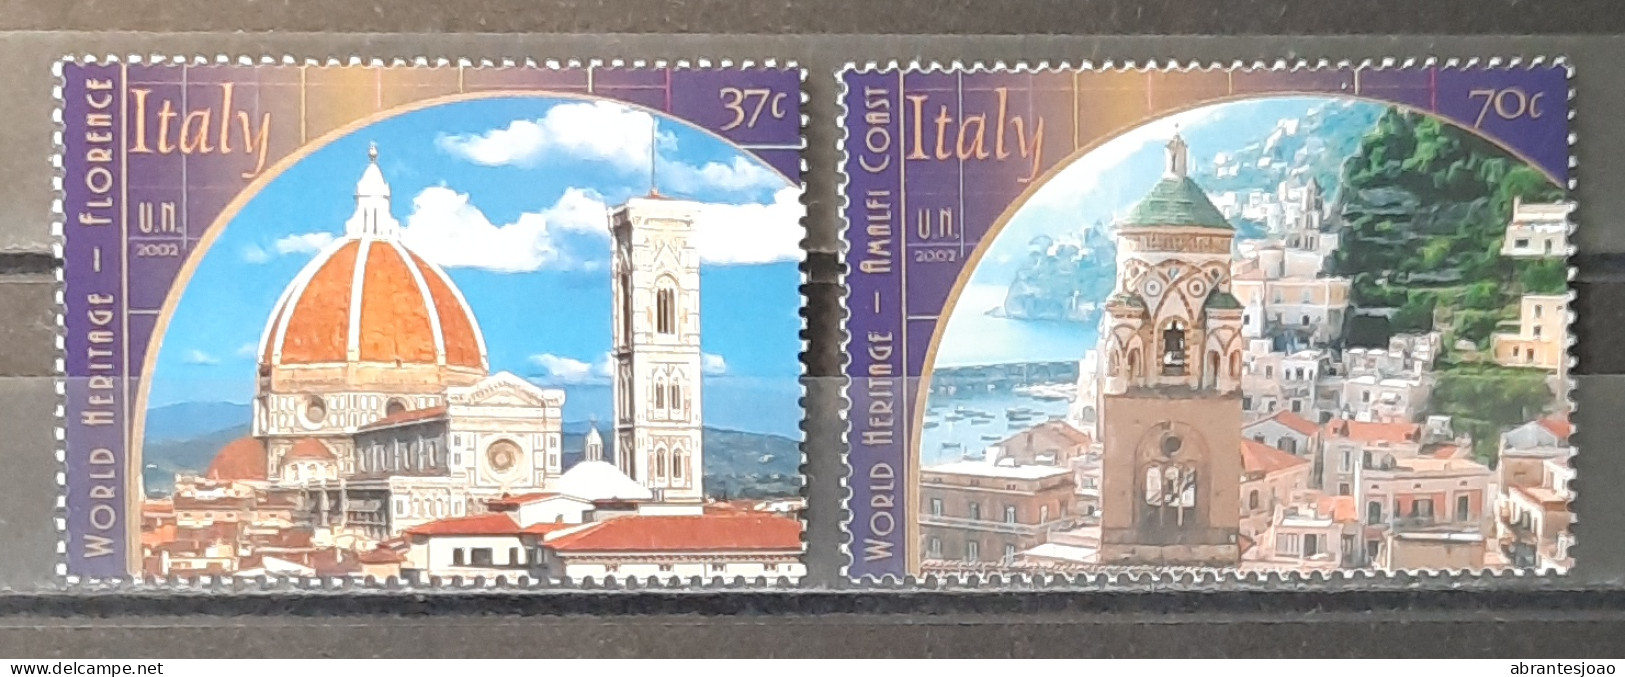 2002 - United Nations New York - MNH - Italy World Heritage - 2 Stamps - Neufs